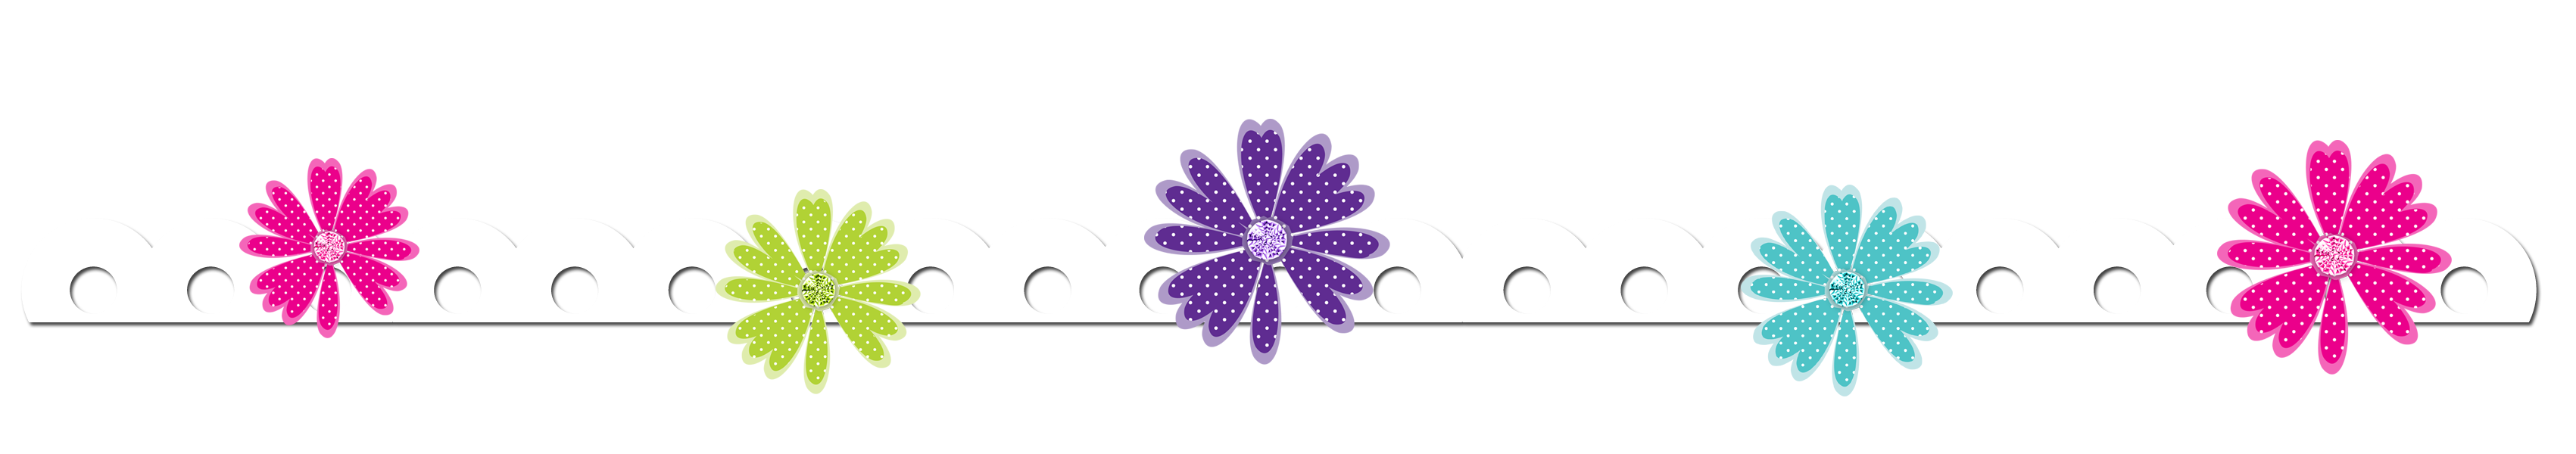 Flower border downloadable all things positively positive clipart